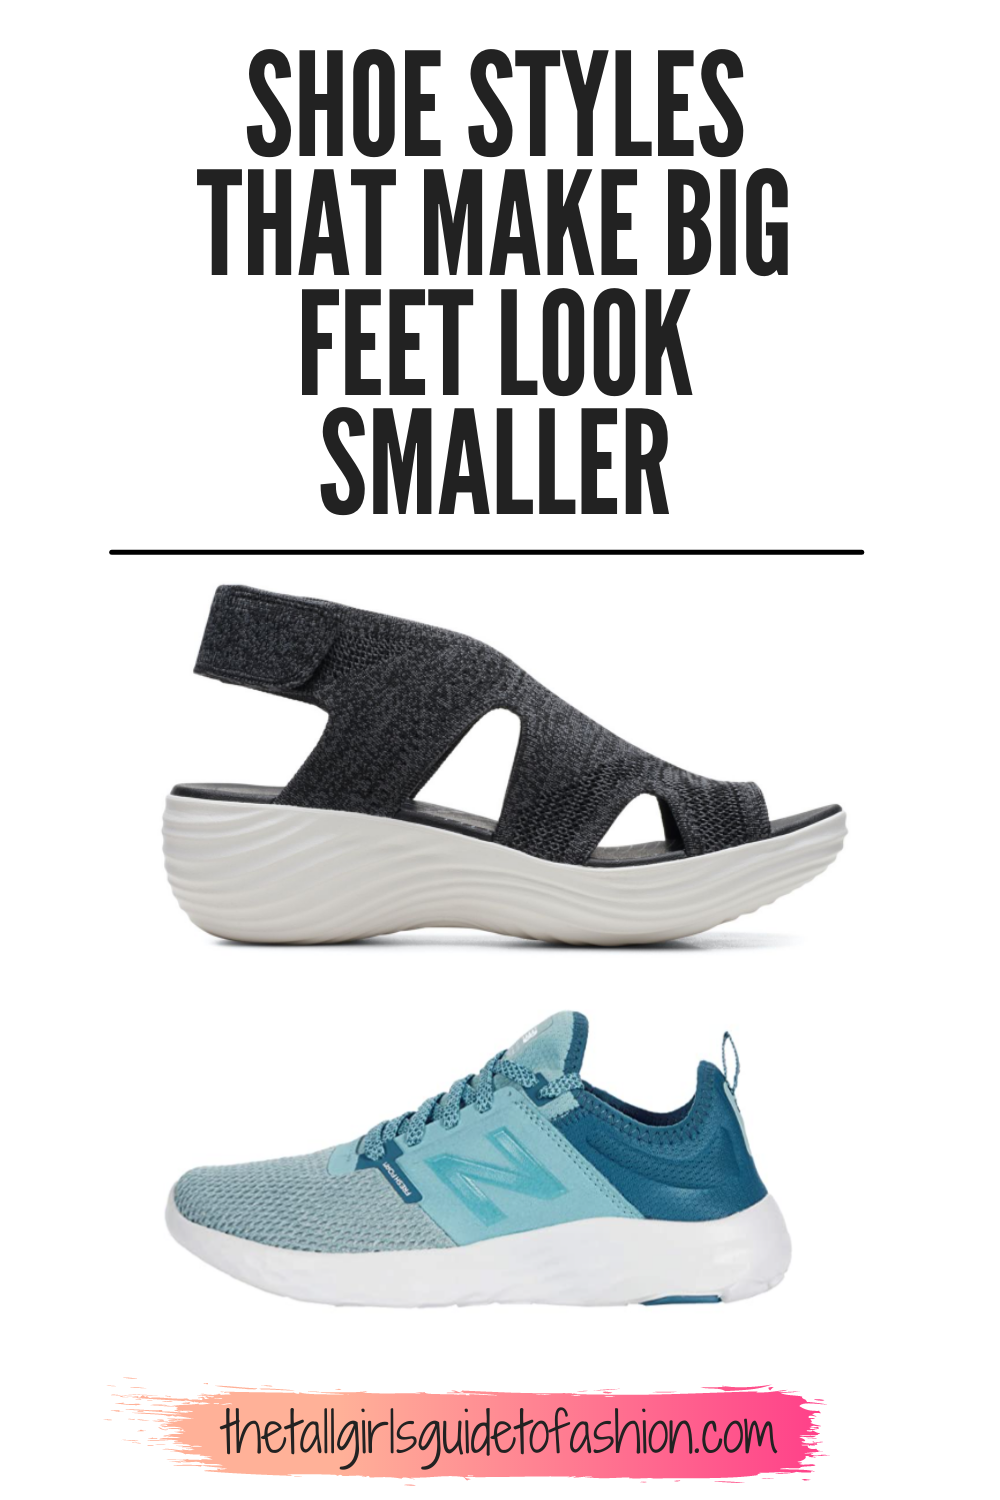 These are the shoes to buy if you have really big feet